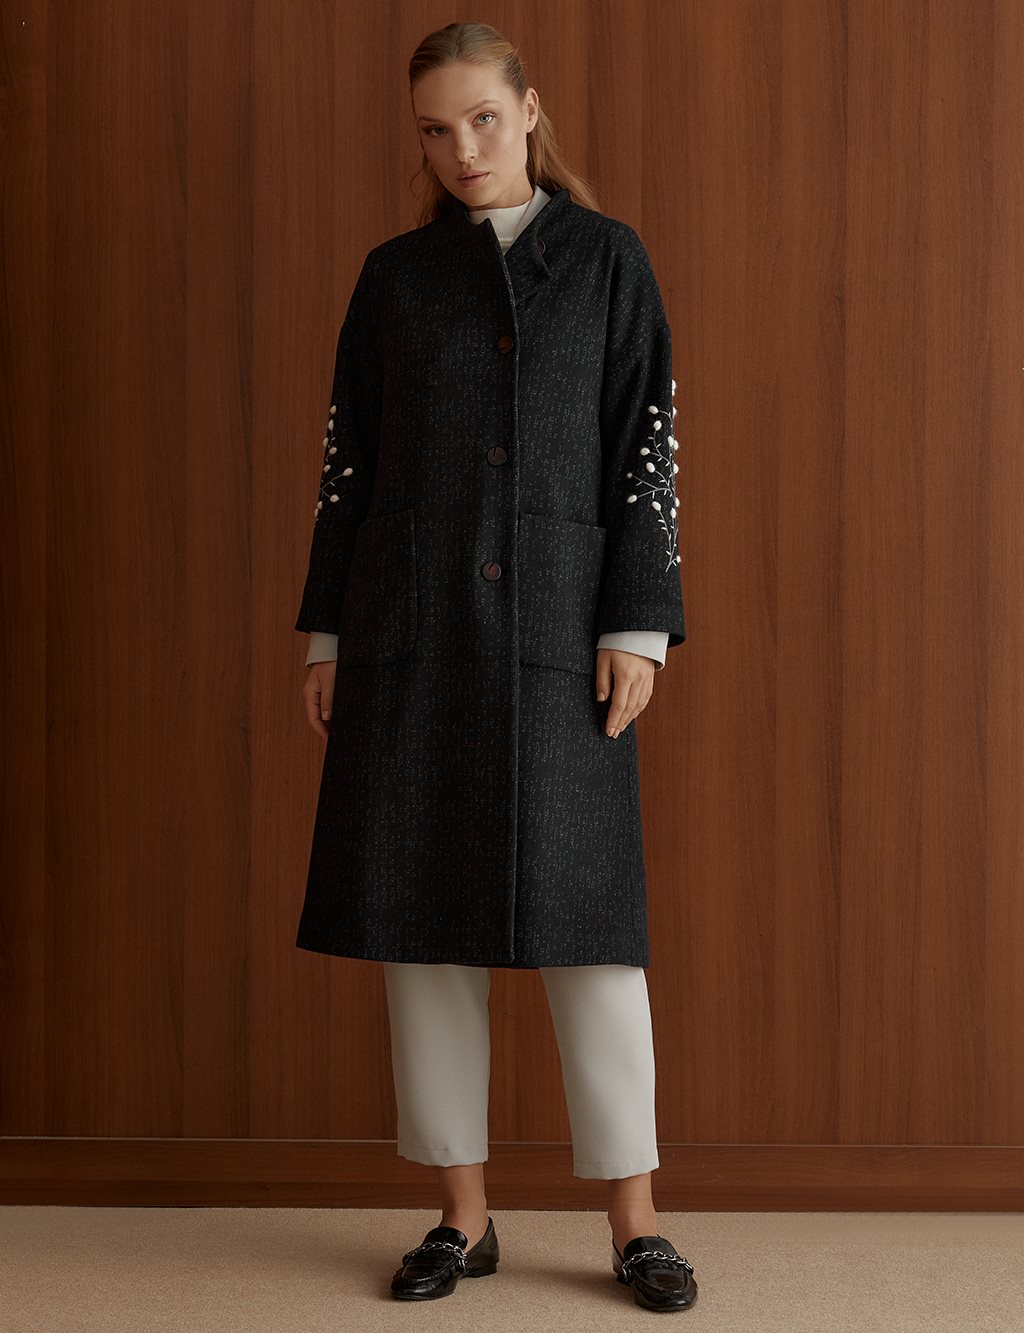 Embroidered Arm and Marbled Coat Navy-Claret Red